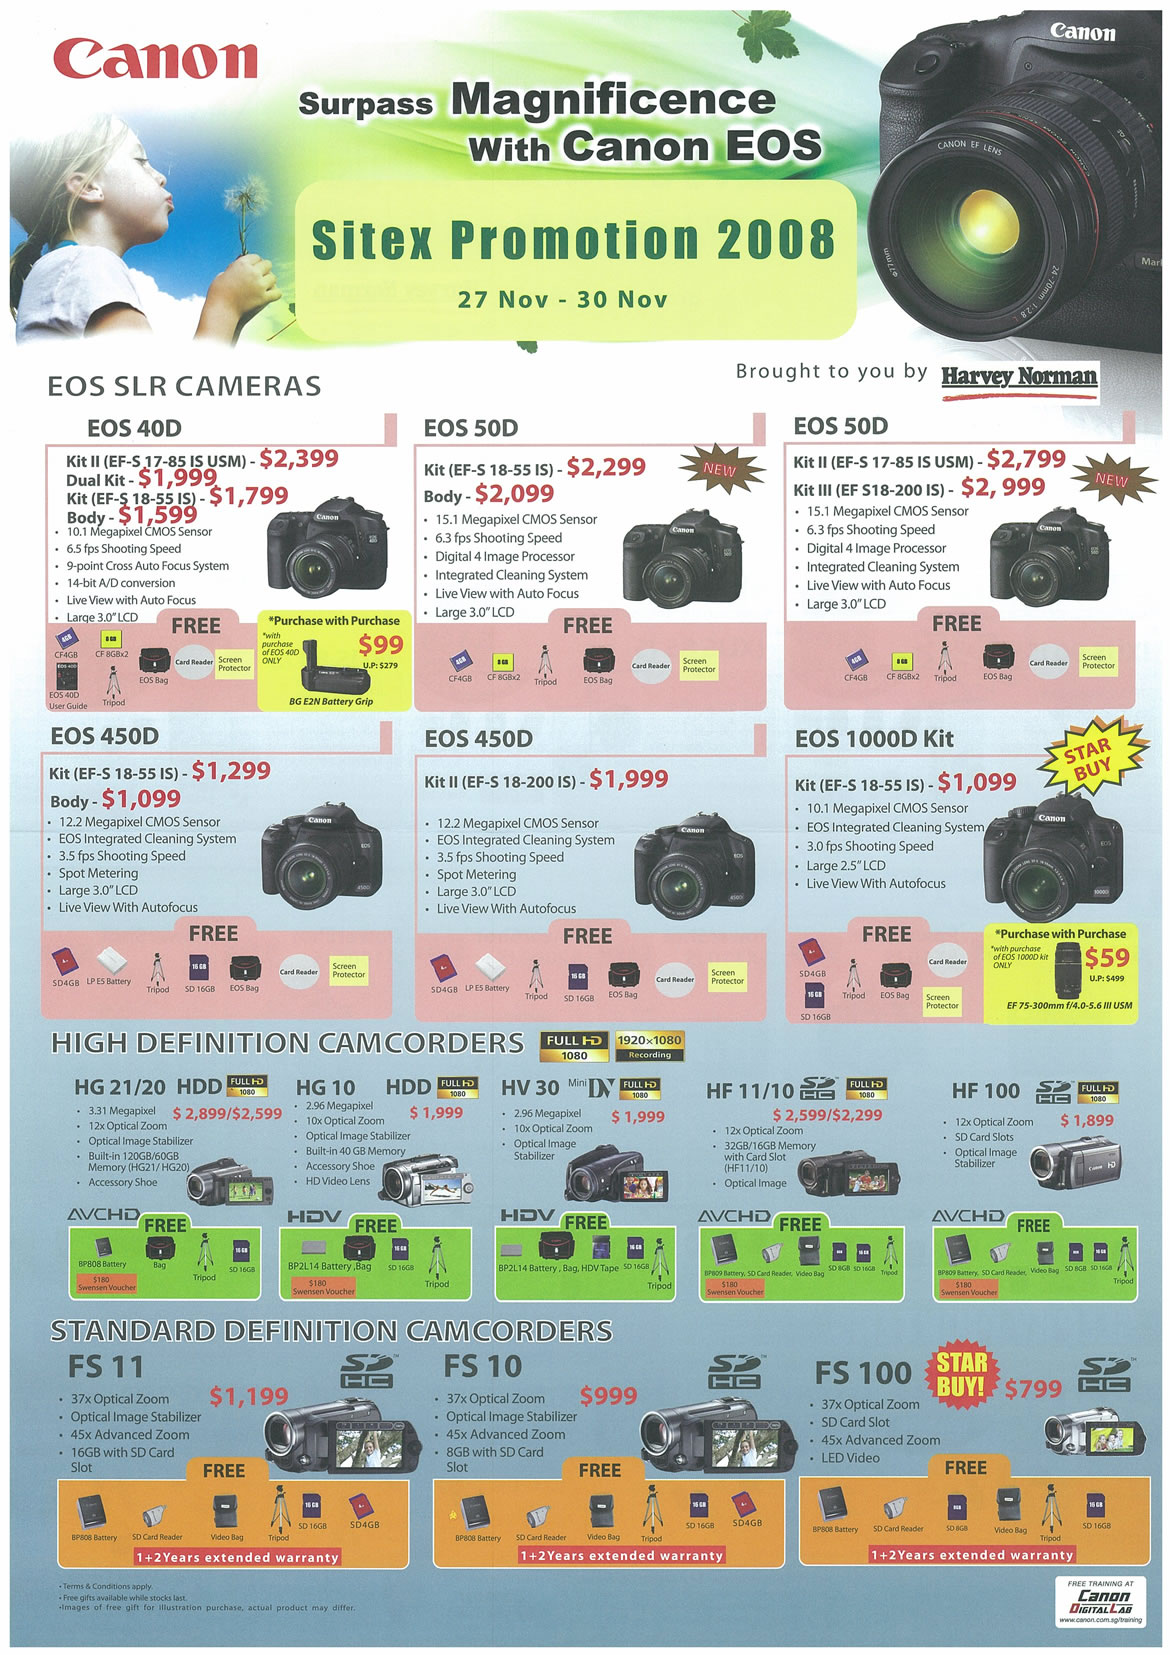 Sitex 2008 price list image brochure of Canon IXUS EOS Cameras Camcorders Page 2 - Vr-zone Tclong